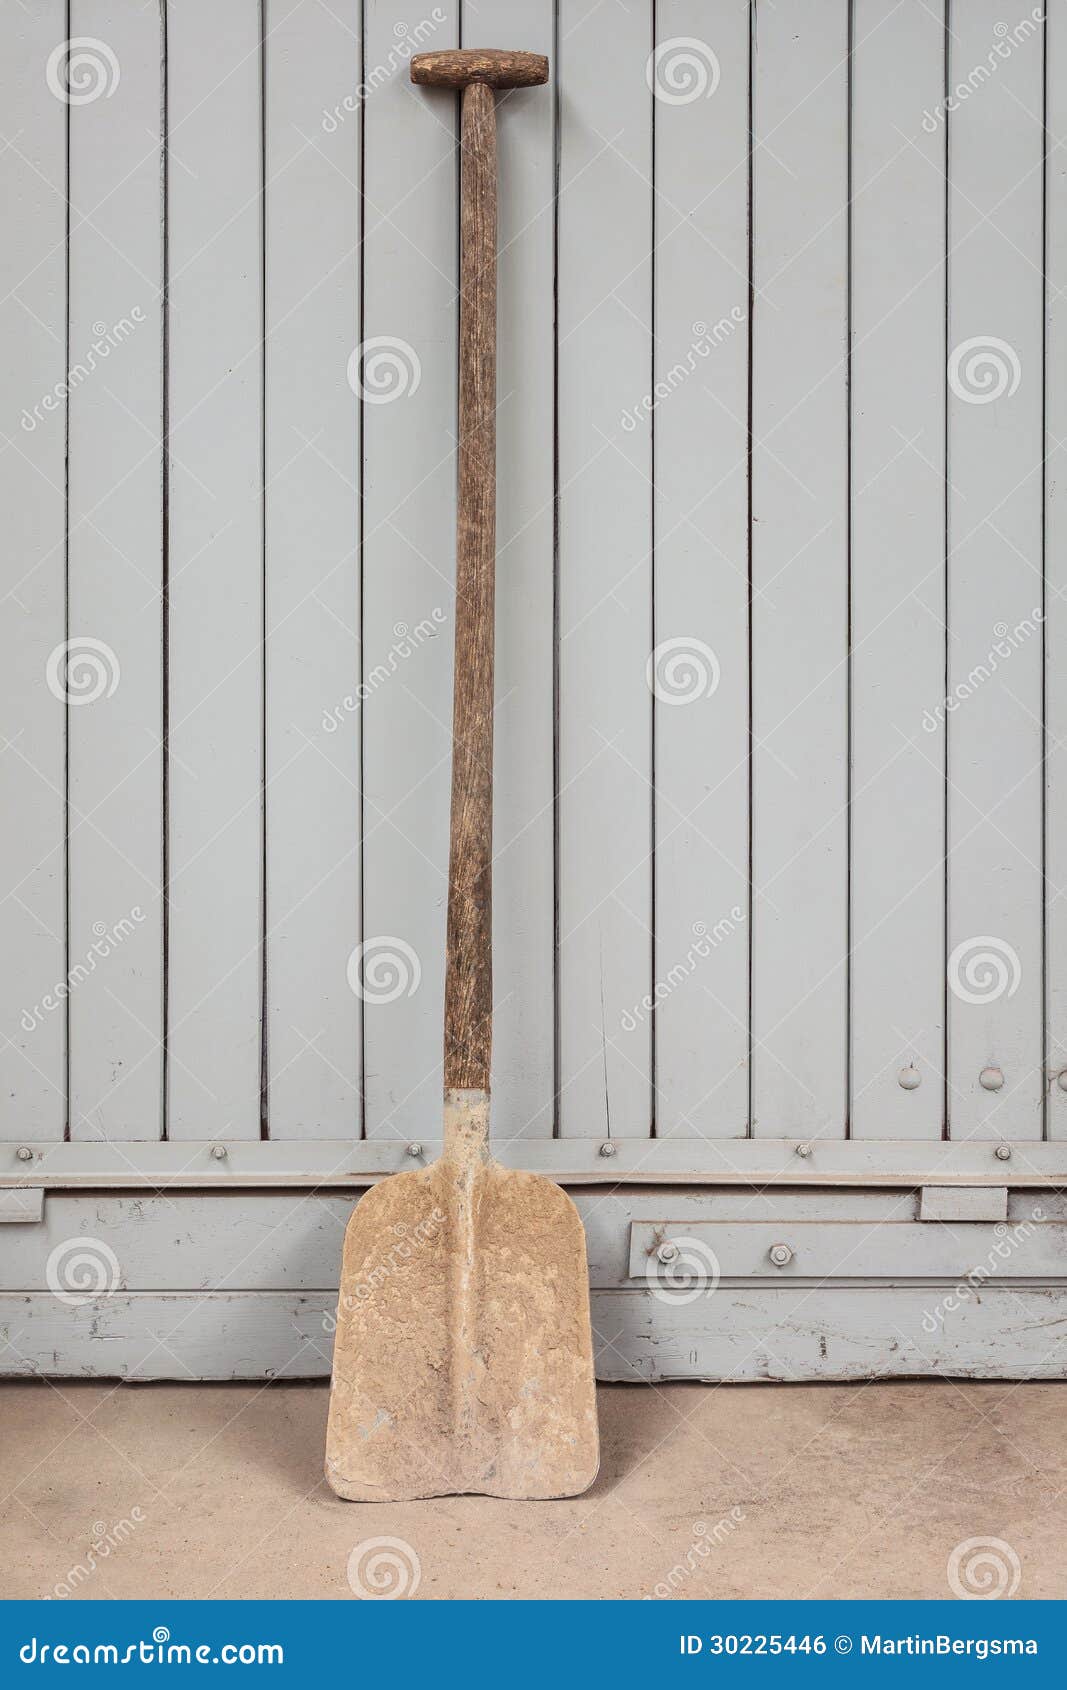 Old Rusty Shovel Against A Wooden Door Royalty Free Stock ...